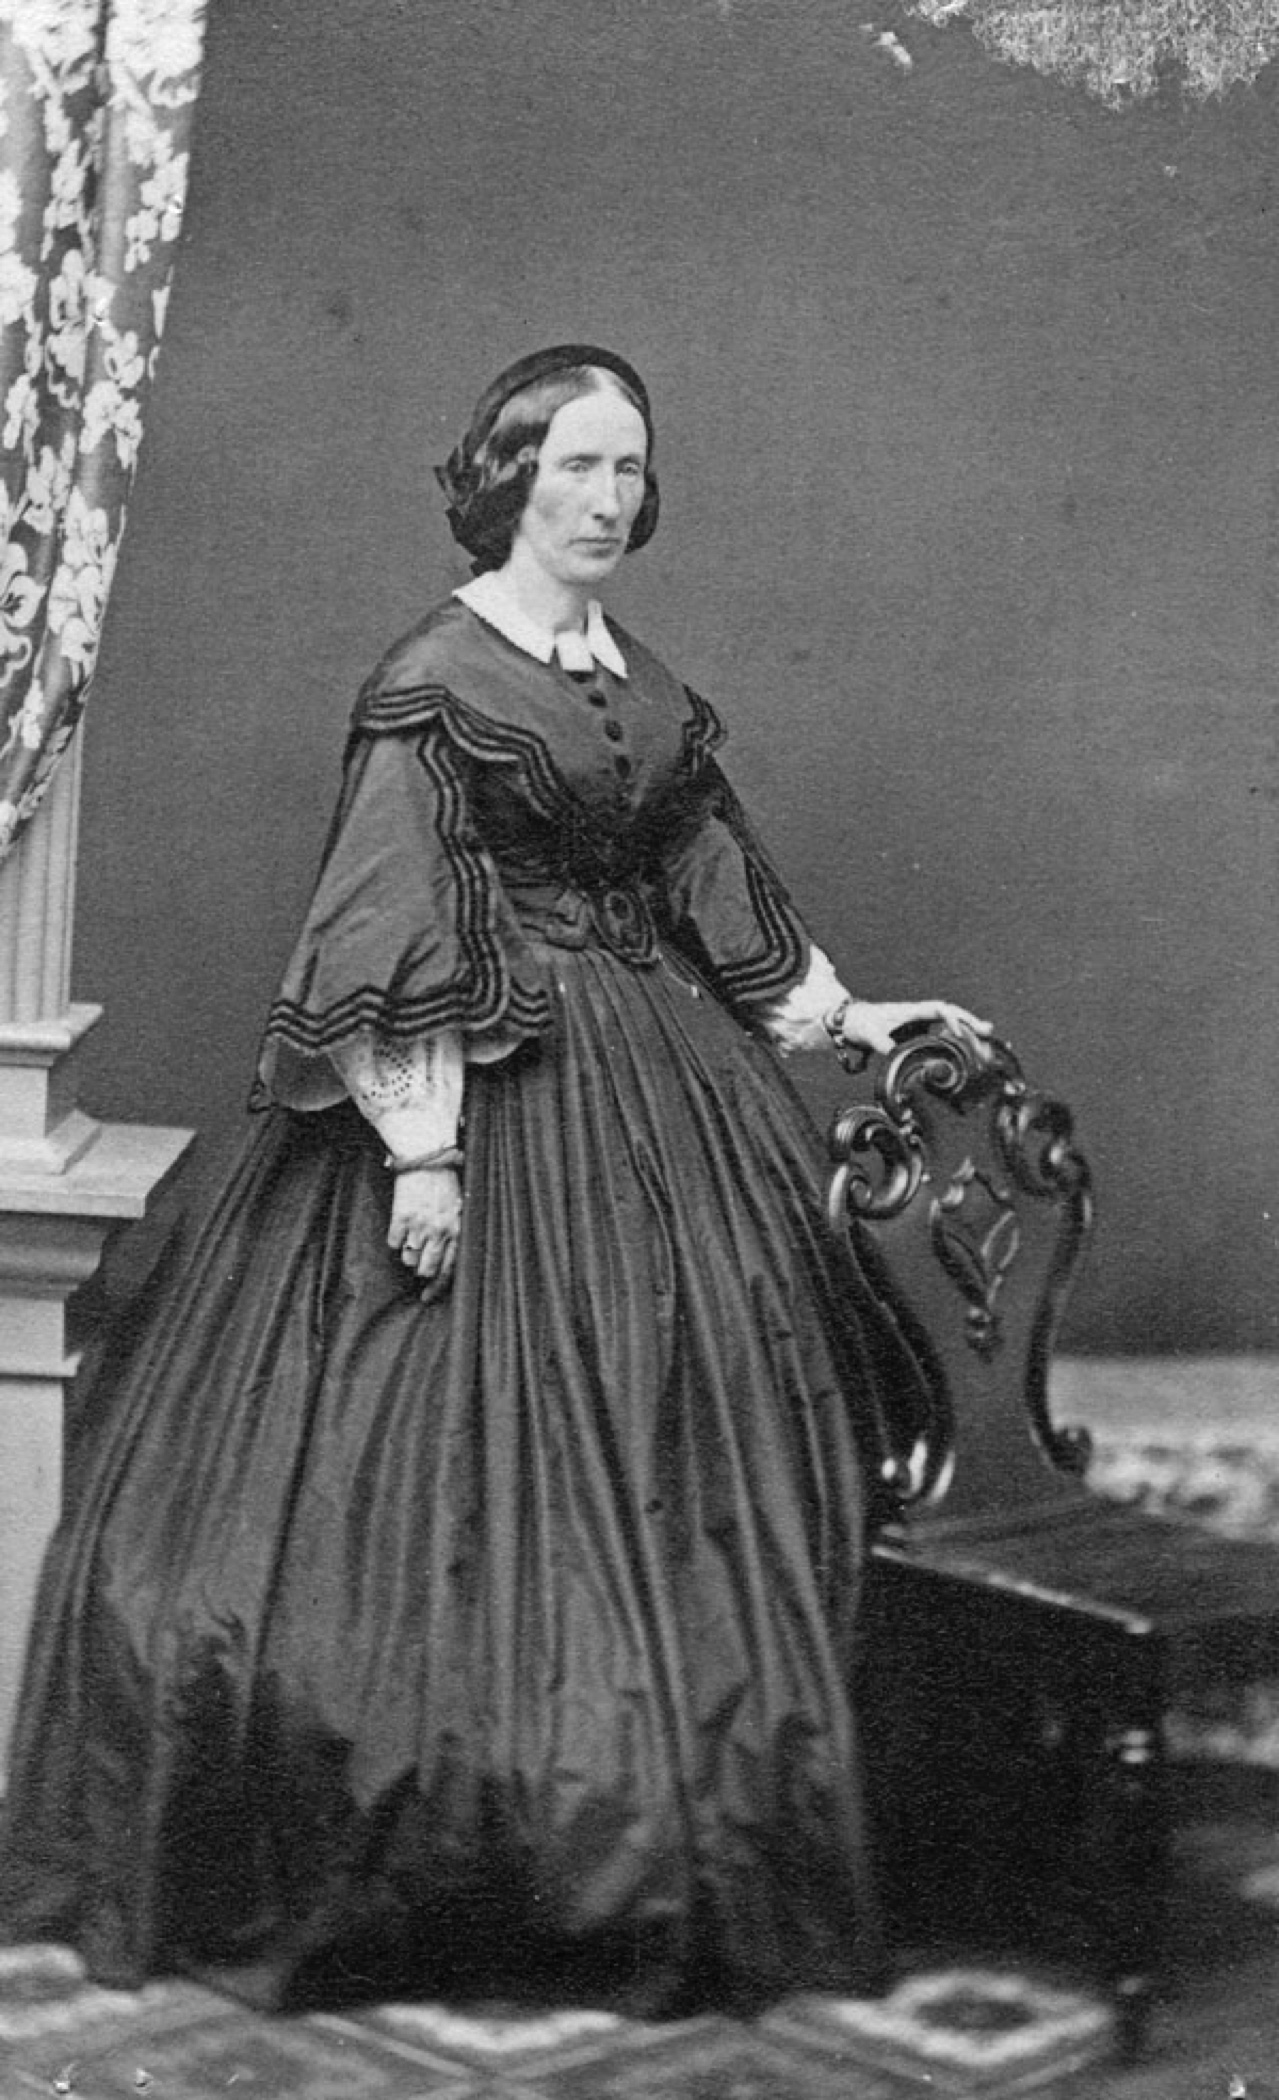 A formal black and white portrait of Louisa Macdonald, a woman standing in a full-length black dress, holding one hand on the back of a chair. Her dark hair is parted in the middle and arranged at the back. Her expression is distant and serious.